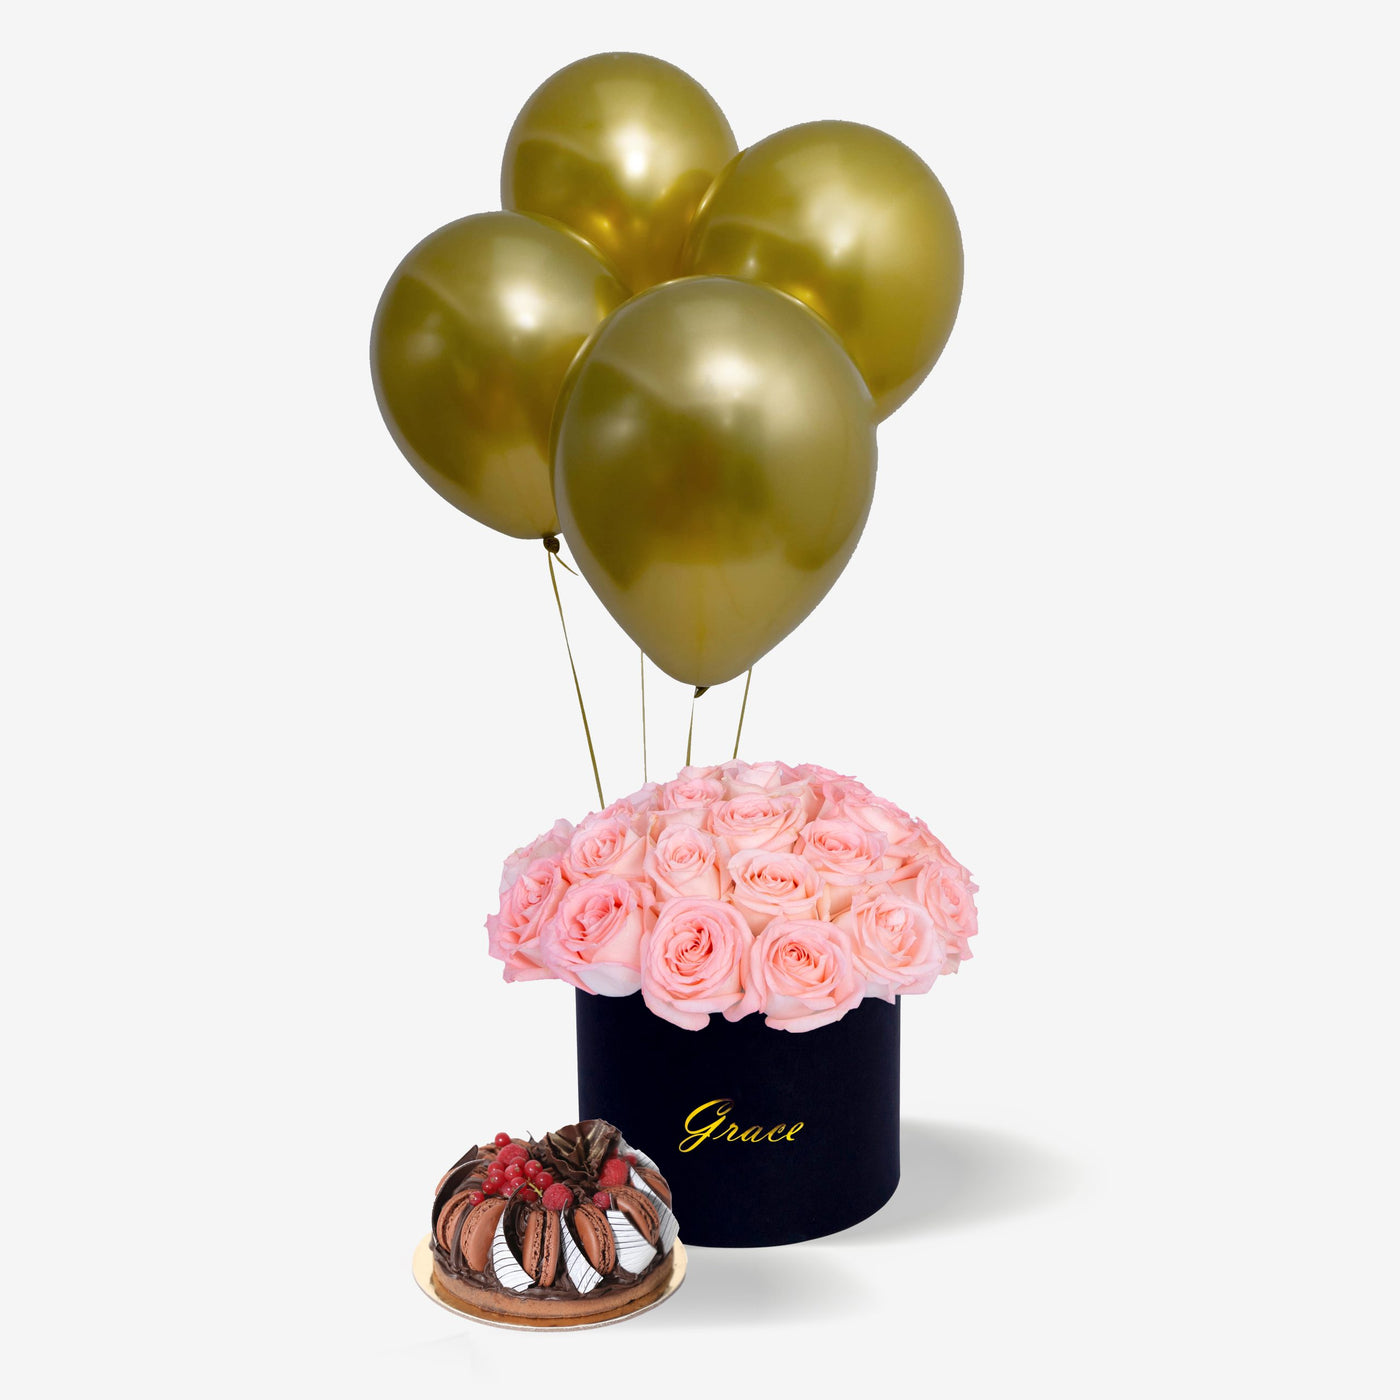 Red Roses in a Box with Balloons & Macaronade Cake